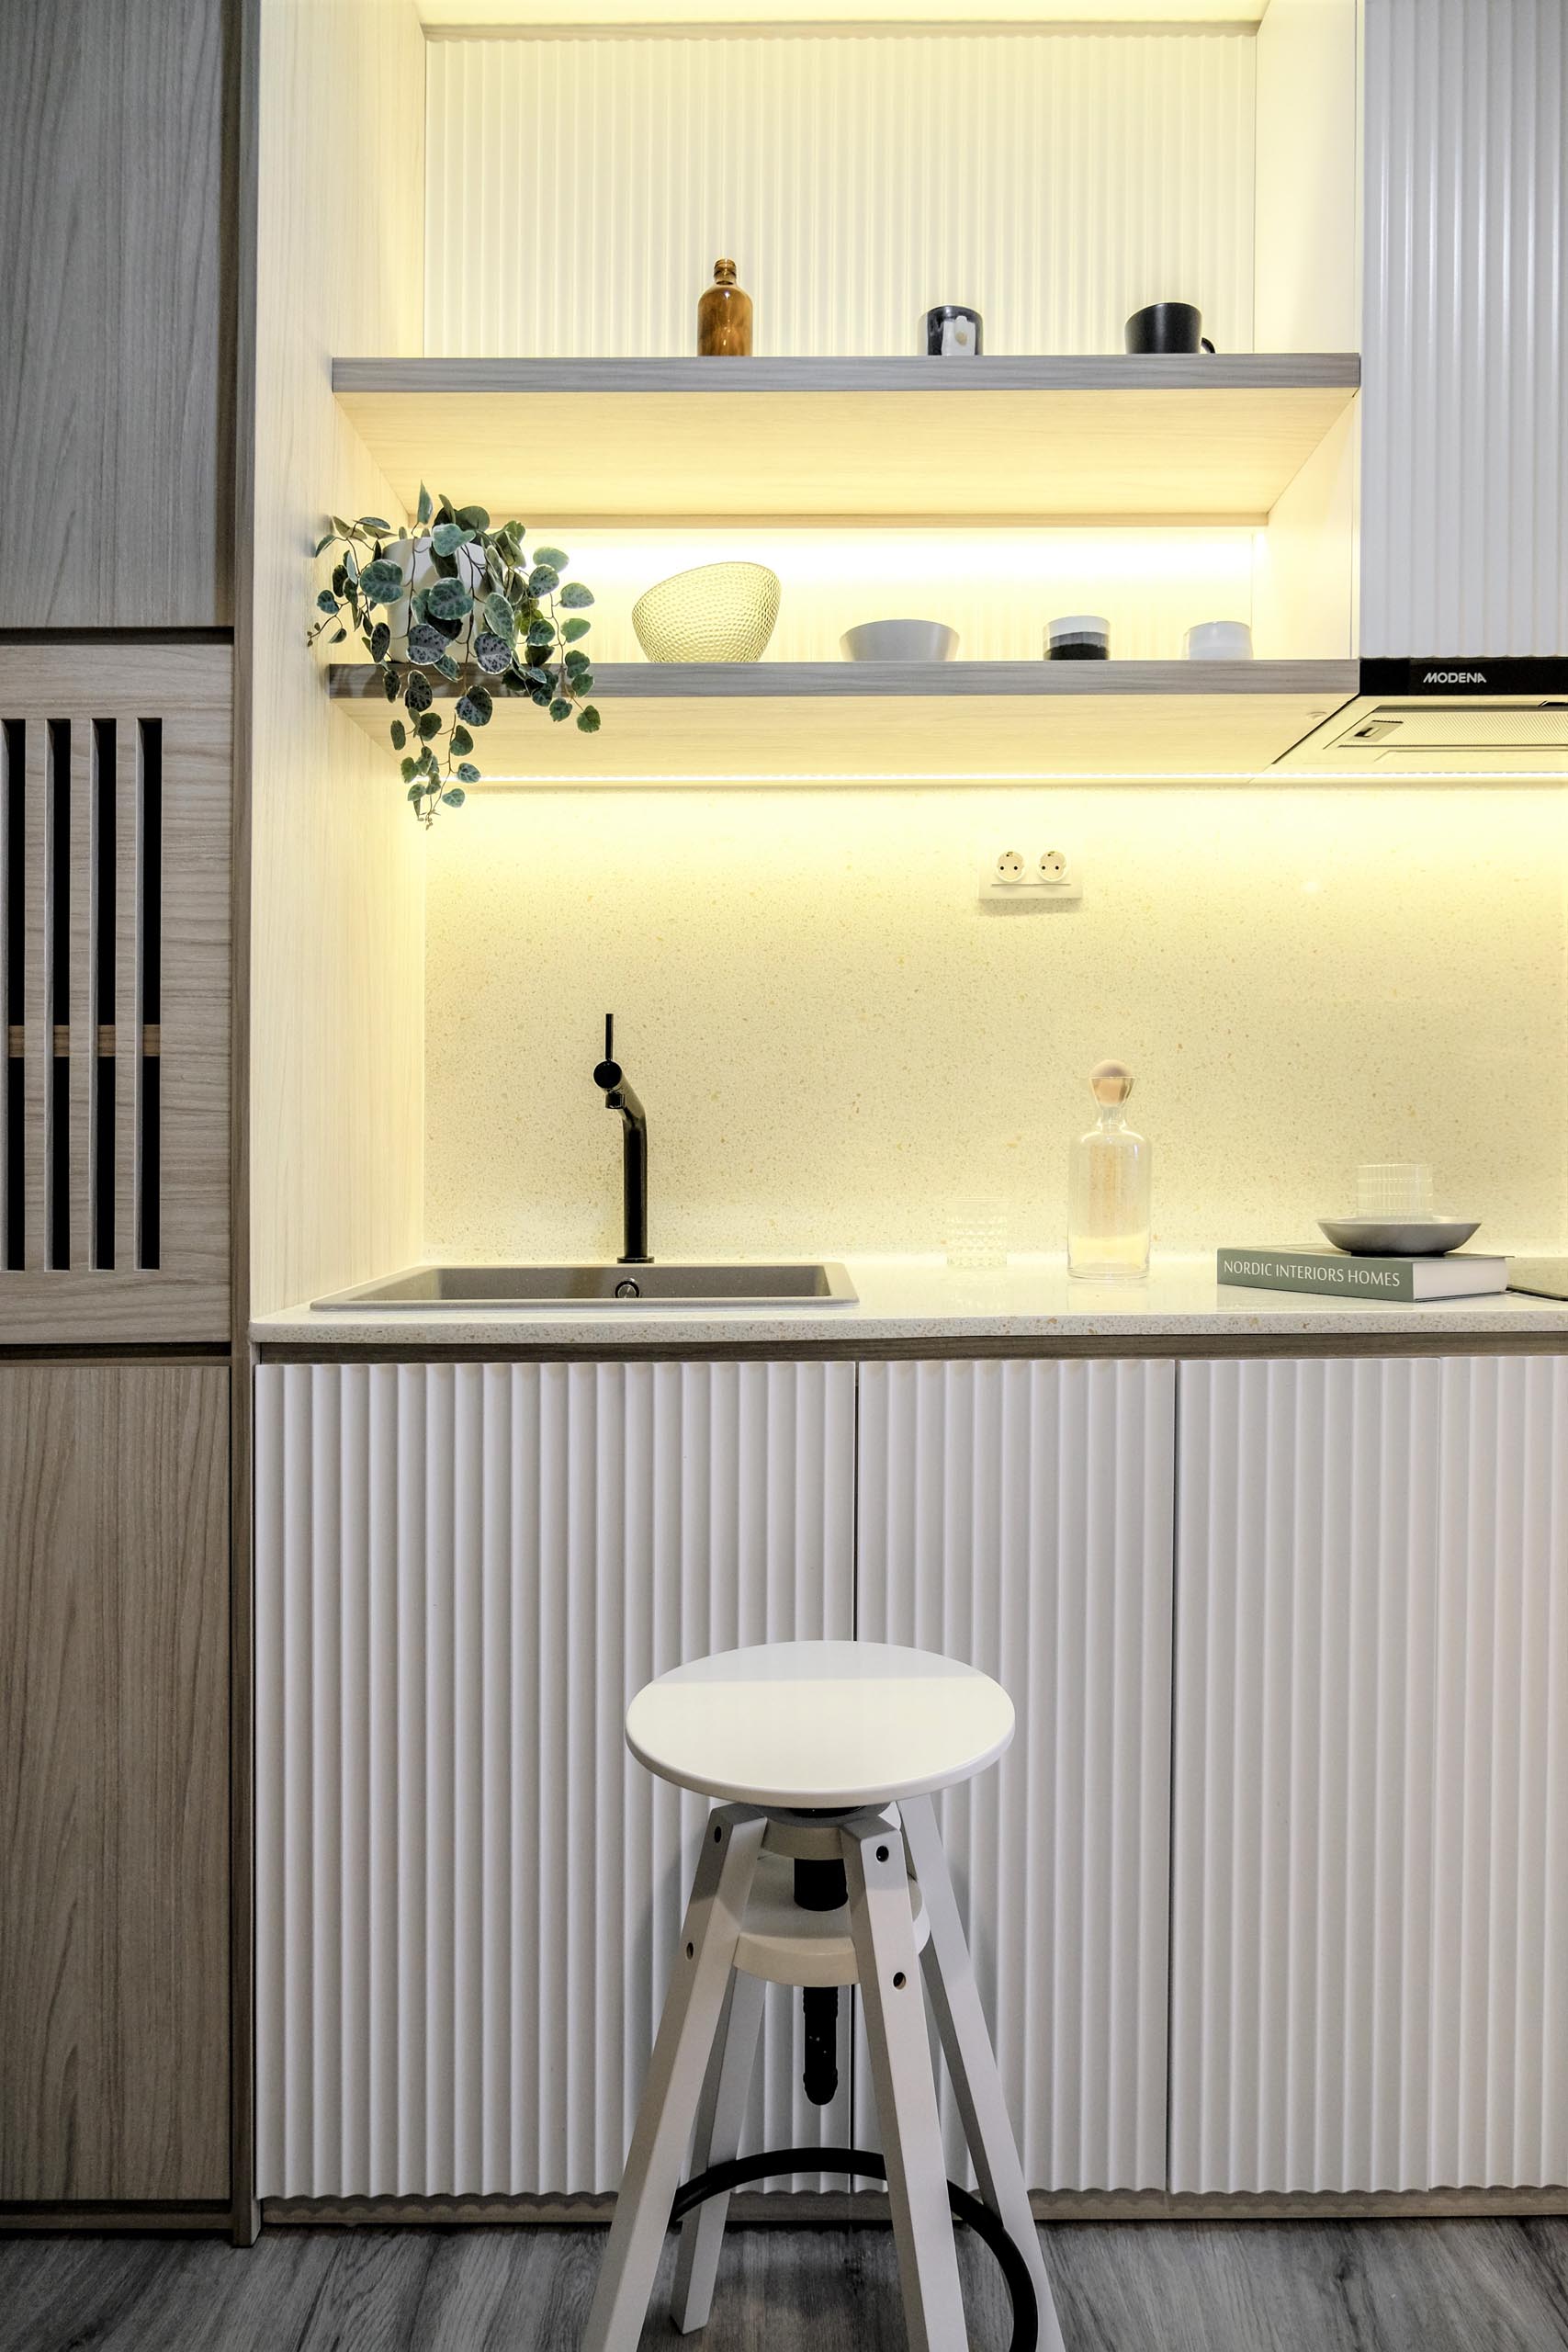 The kitchen of a small apartment includes textured cabinet fronts that help to define the kitchen area, while added lighting underneath the shelves helps brighten the countertops.